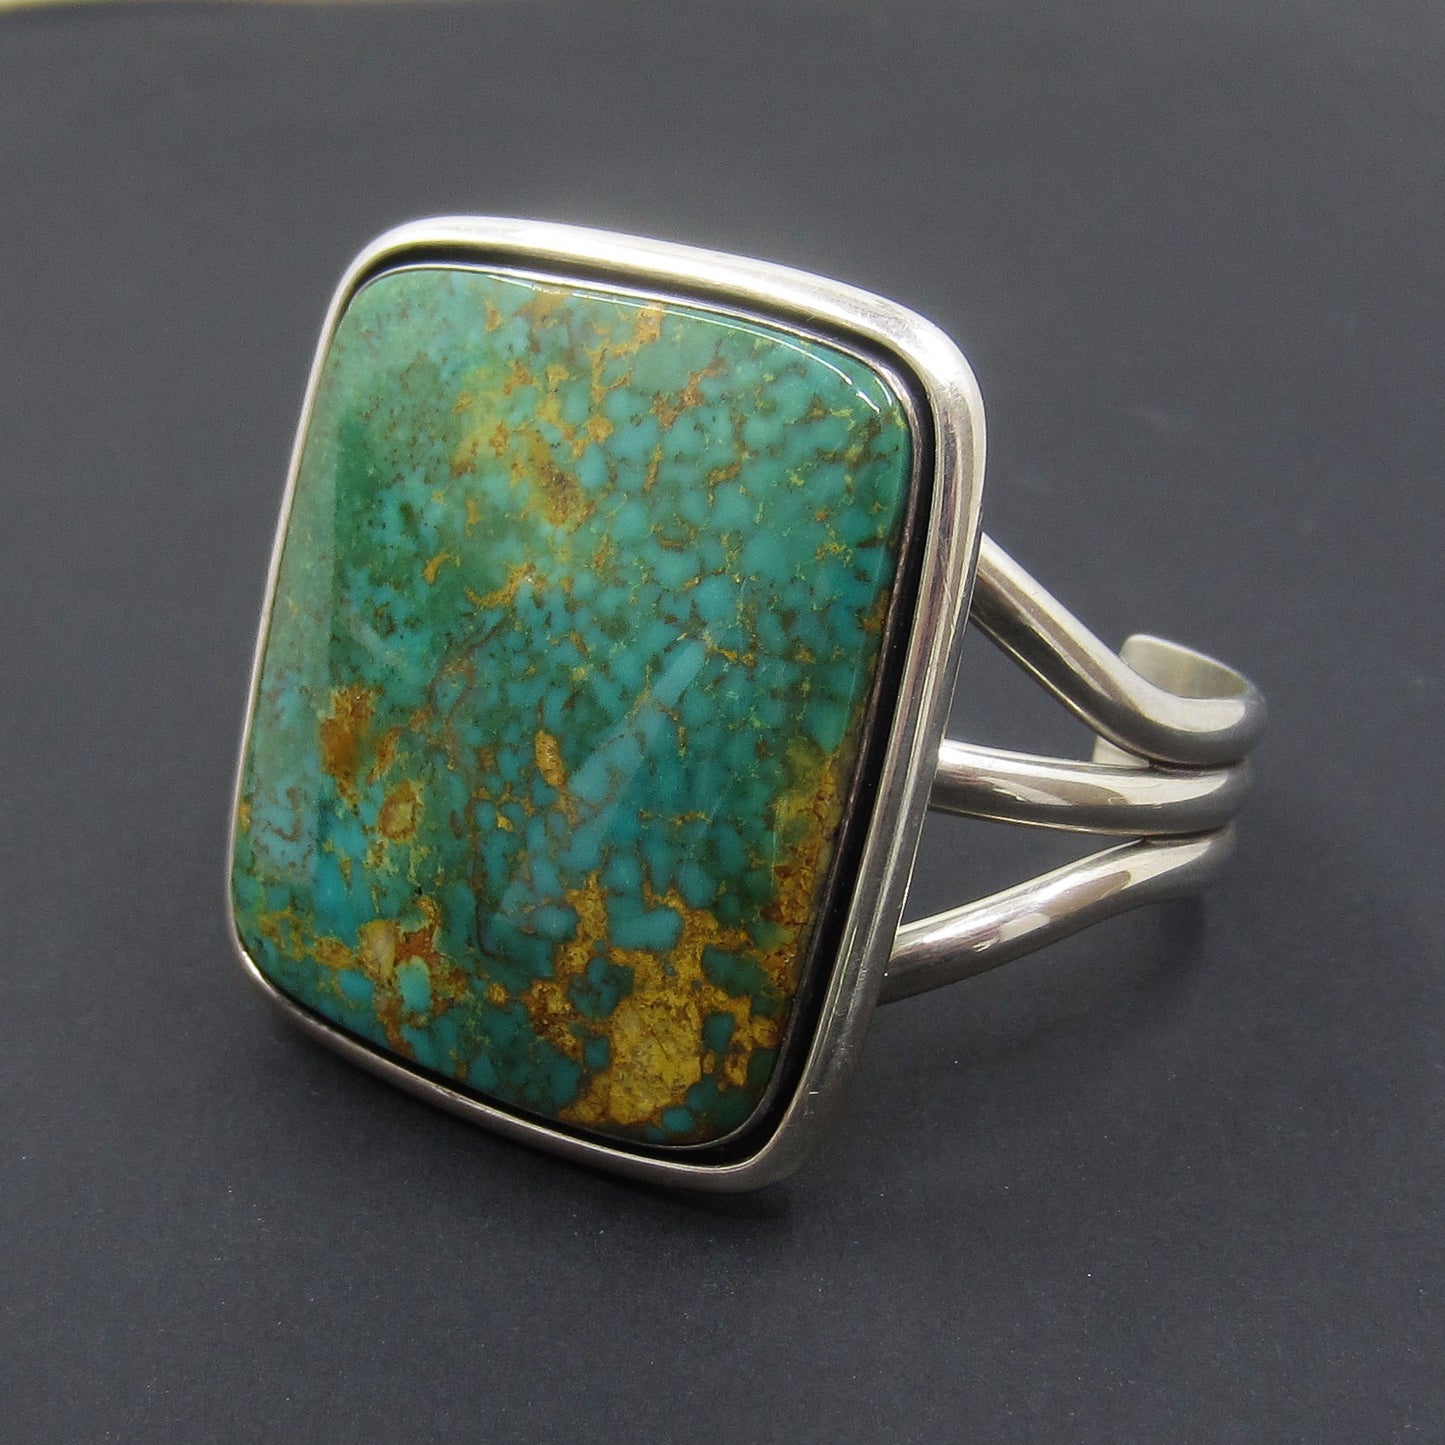 SOLD-Vintage Big Navajo Turquoise Cuff Sterling c. 1970